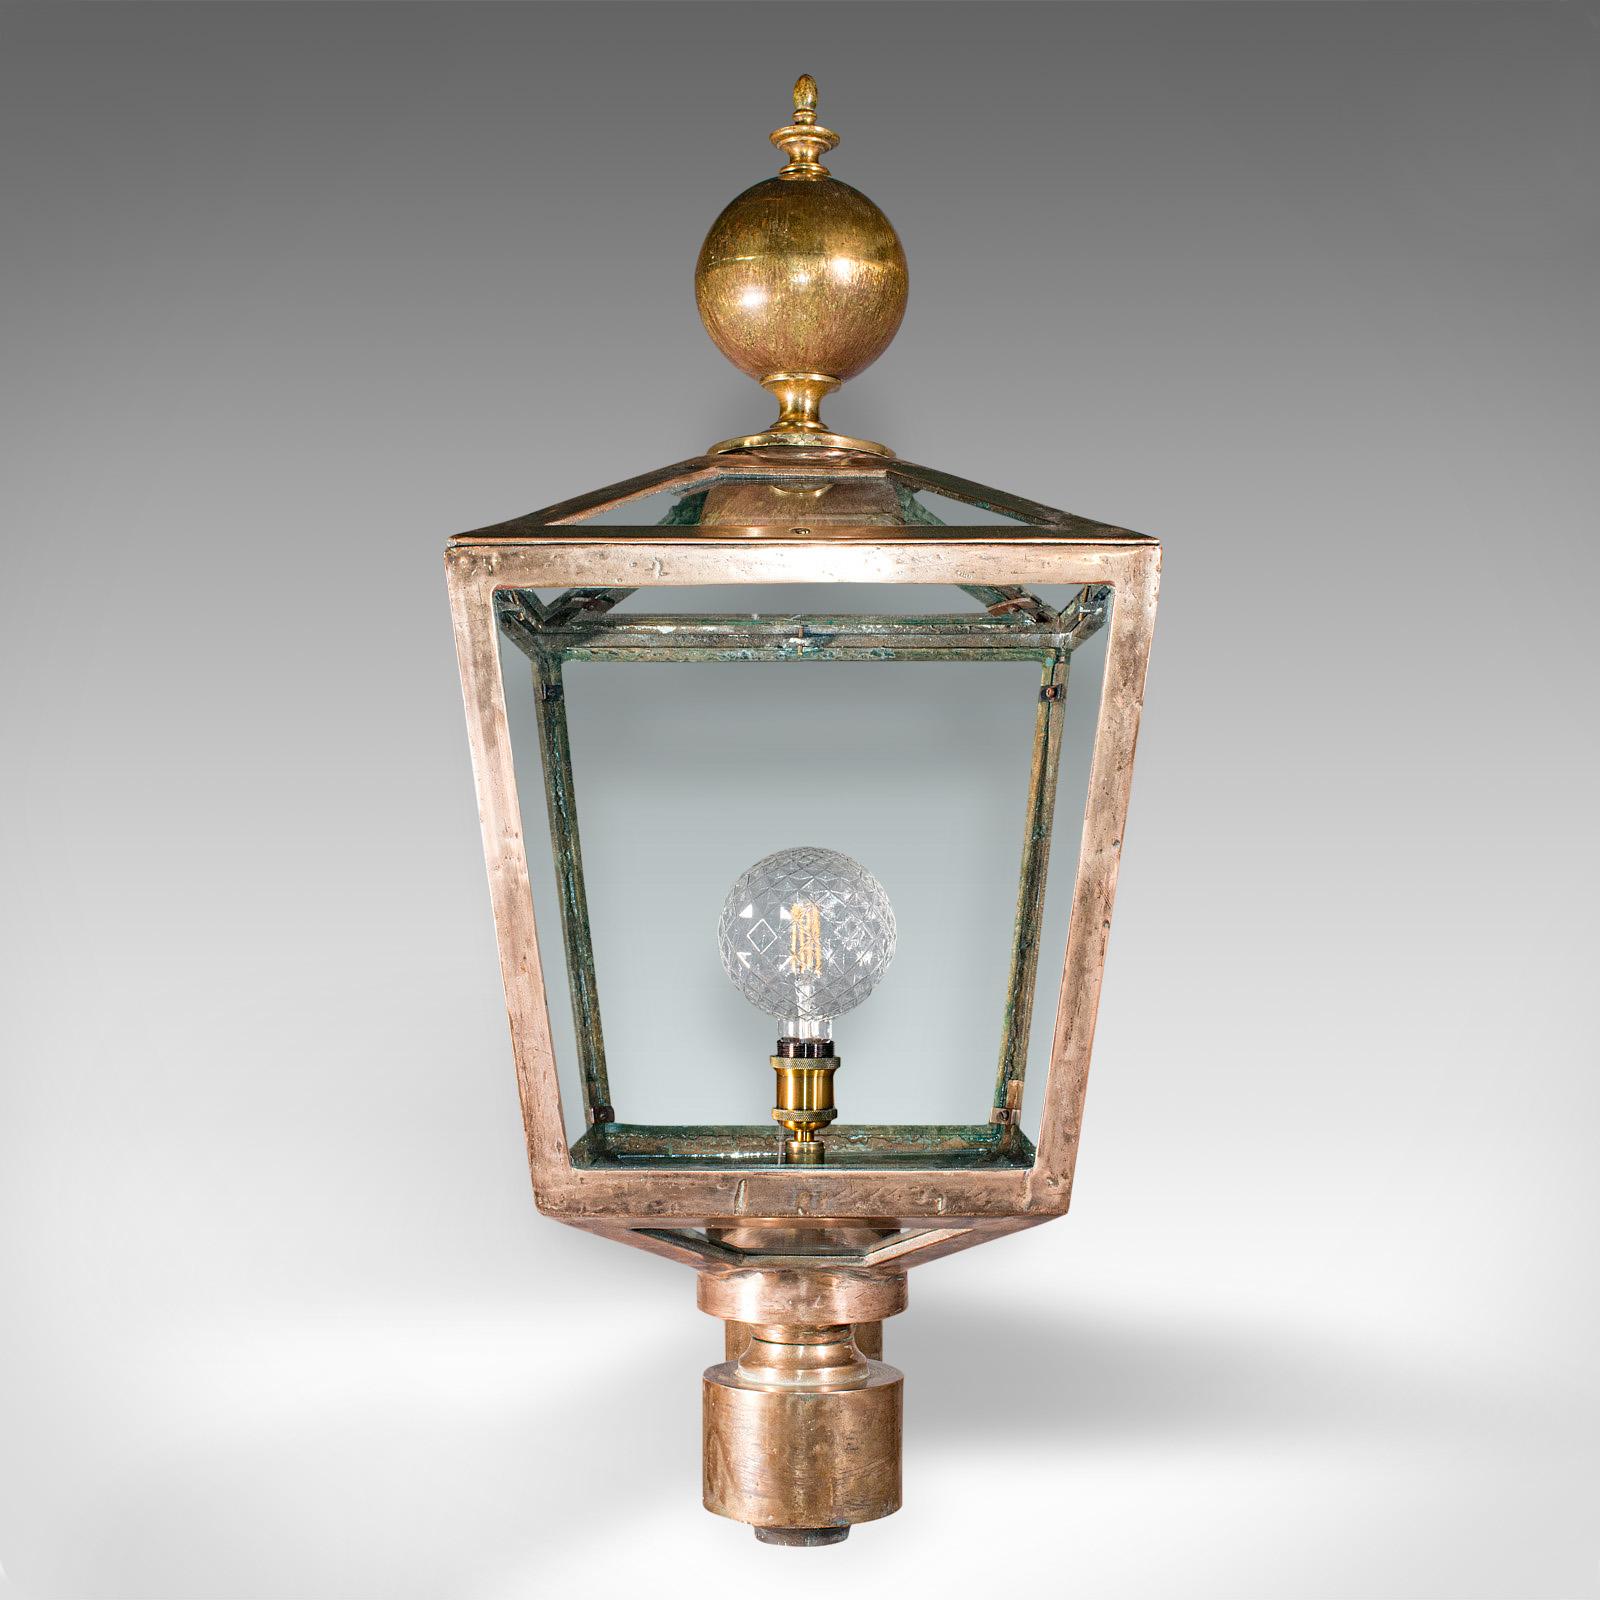 British Large Antique Courtyard Light, English, Bronze, Outdoor Lamp, Victorian, C.1870 For Sale